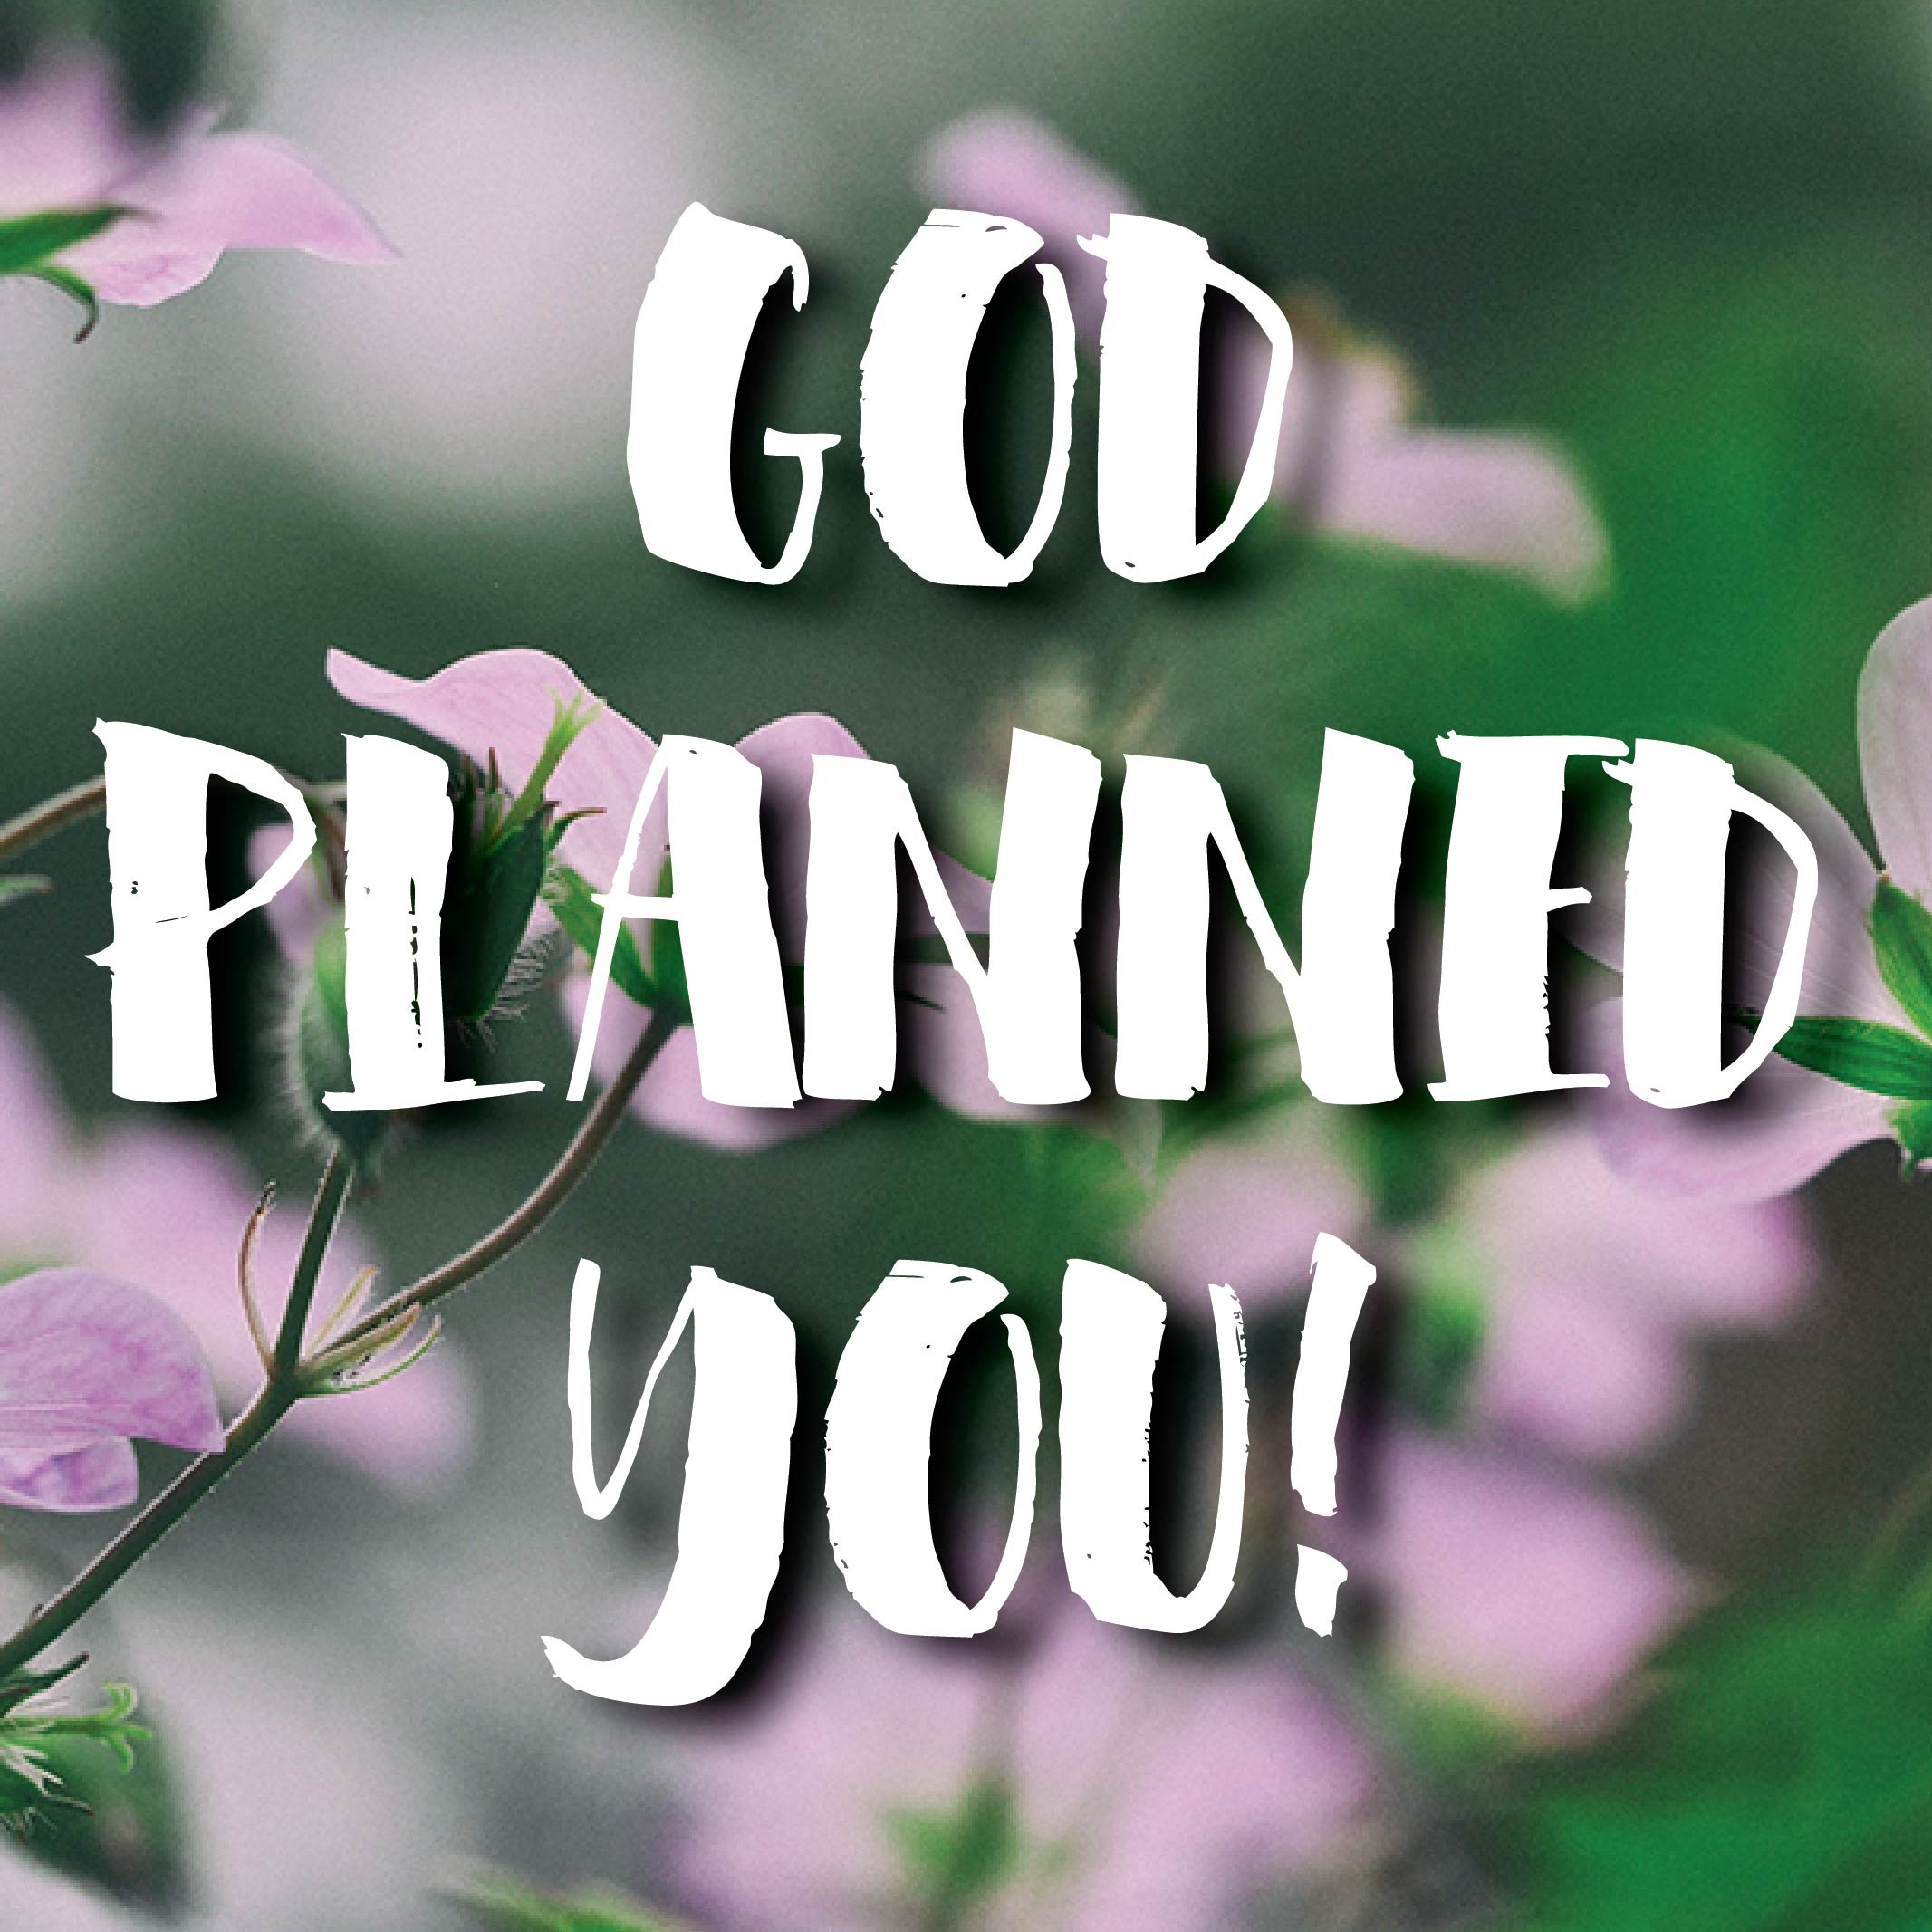 God Planned You!